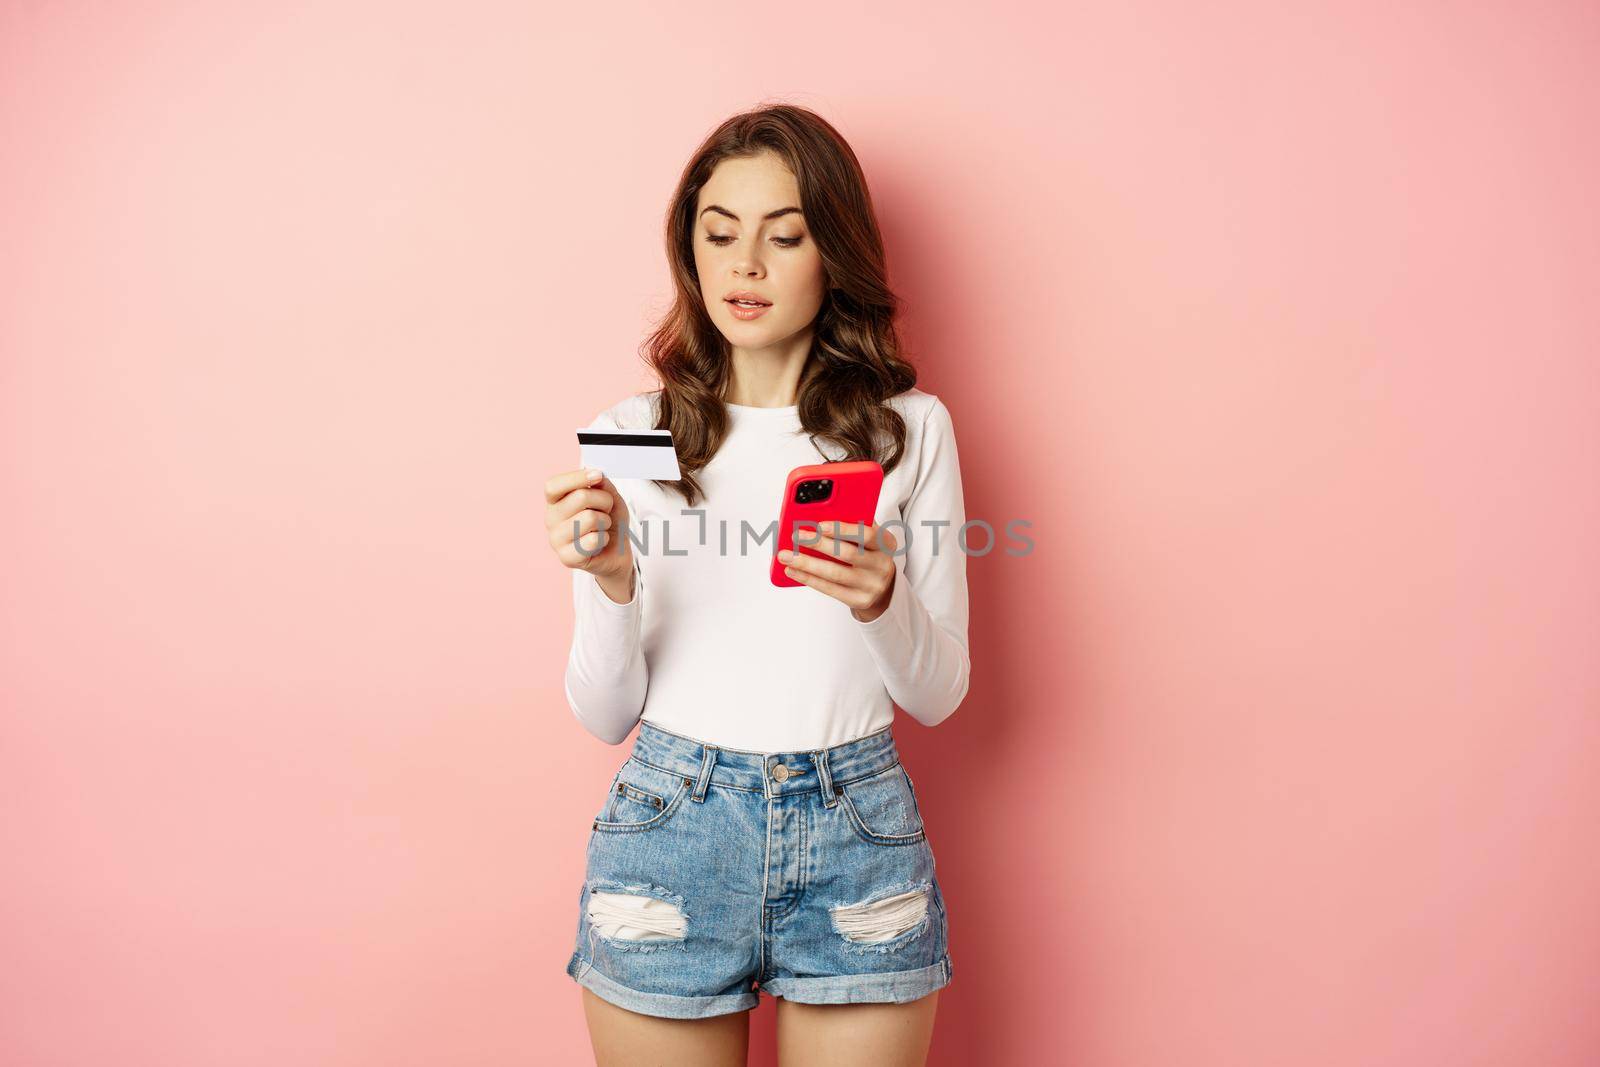 Online shopping. Young woman order online, making purchase in app, holding smartphone and credit card, standing against pink background.